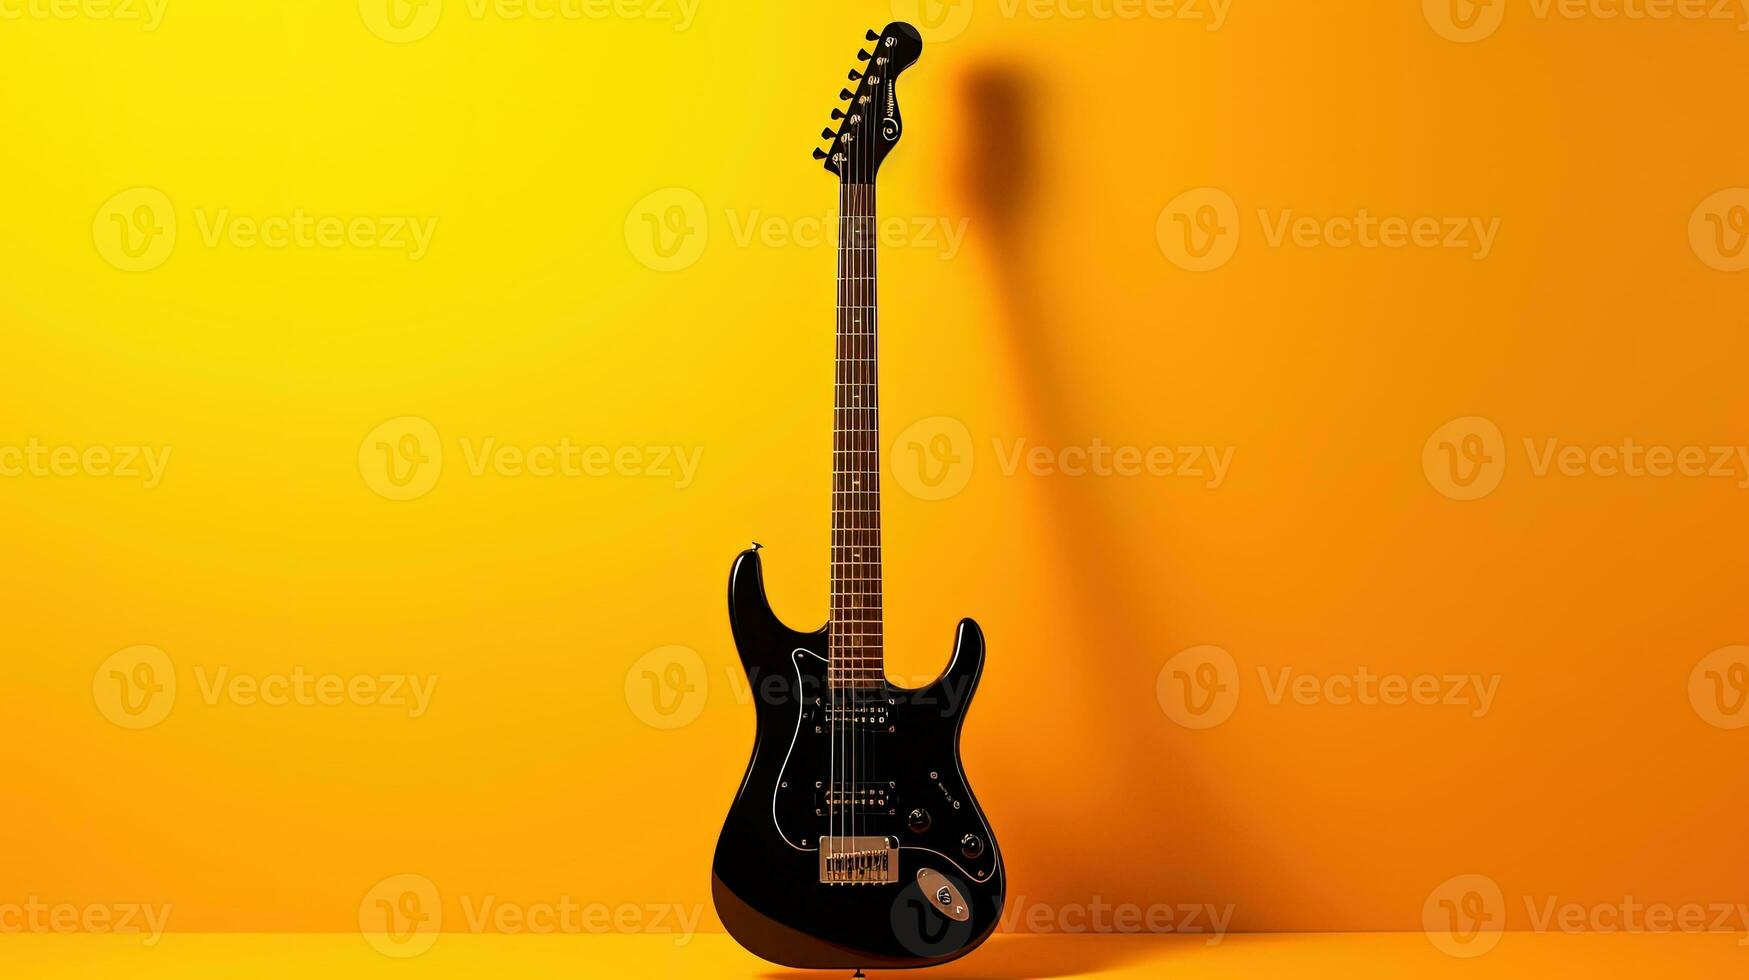 Horizontal electric guitar silhouette on a yellow background photo